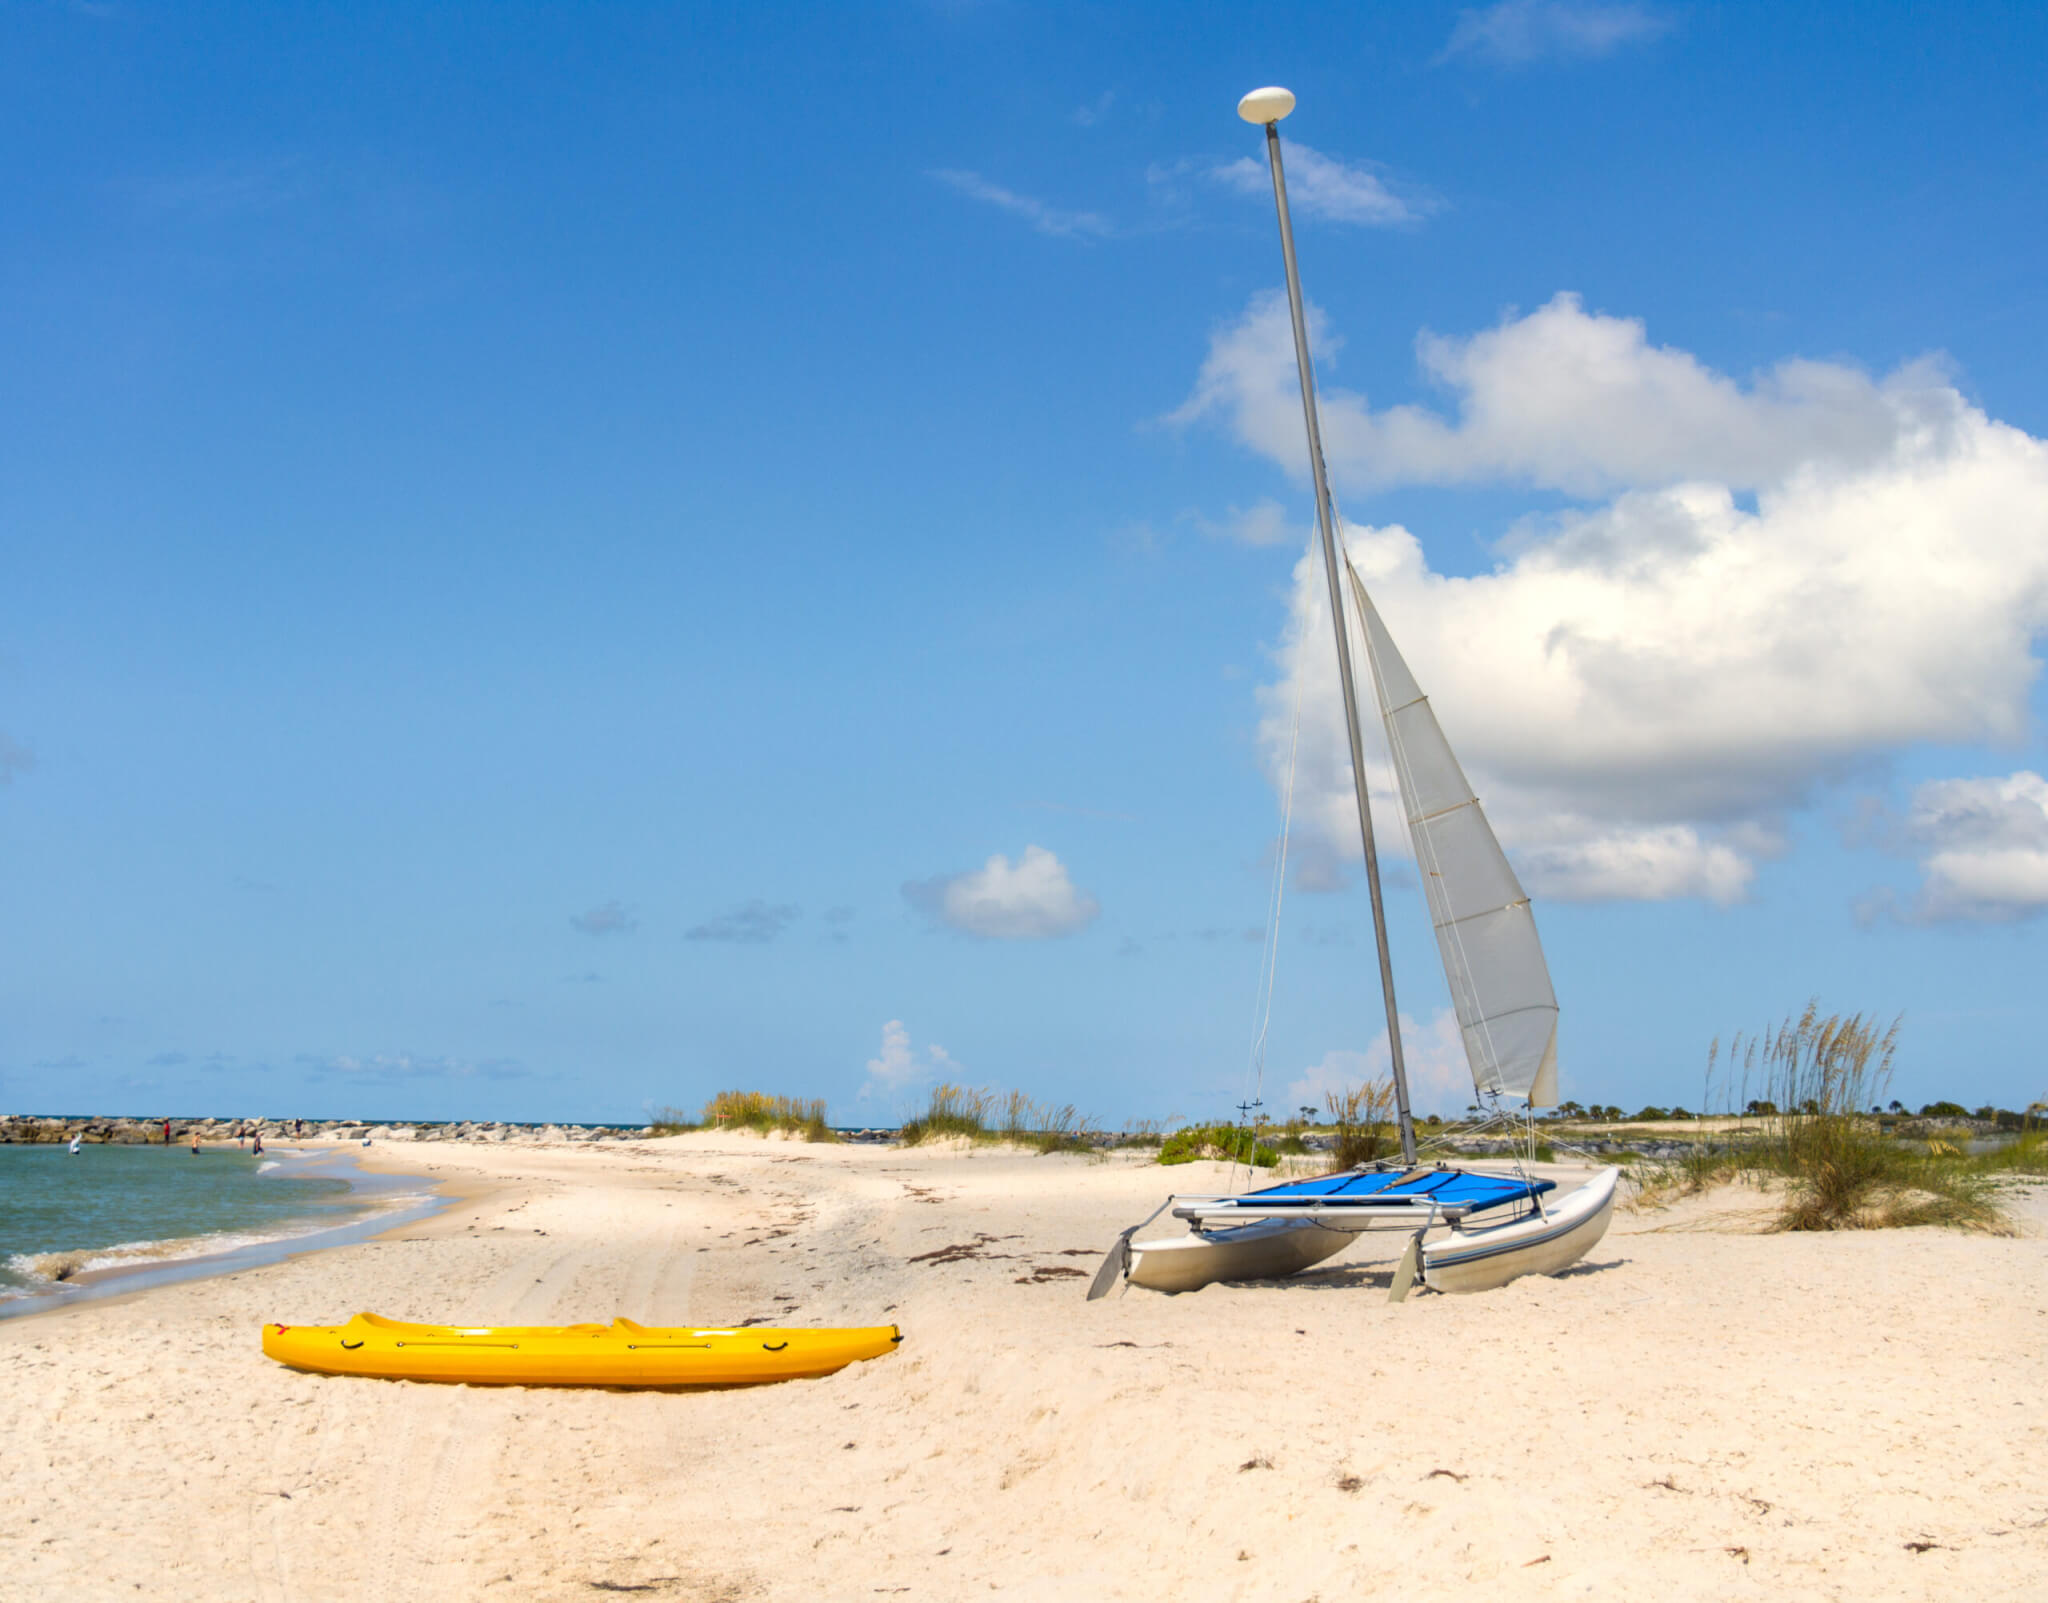 Sail boat and kayak on beach with sunny blue skies St George Island Florida